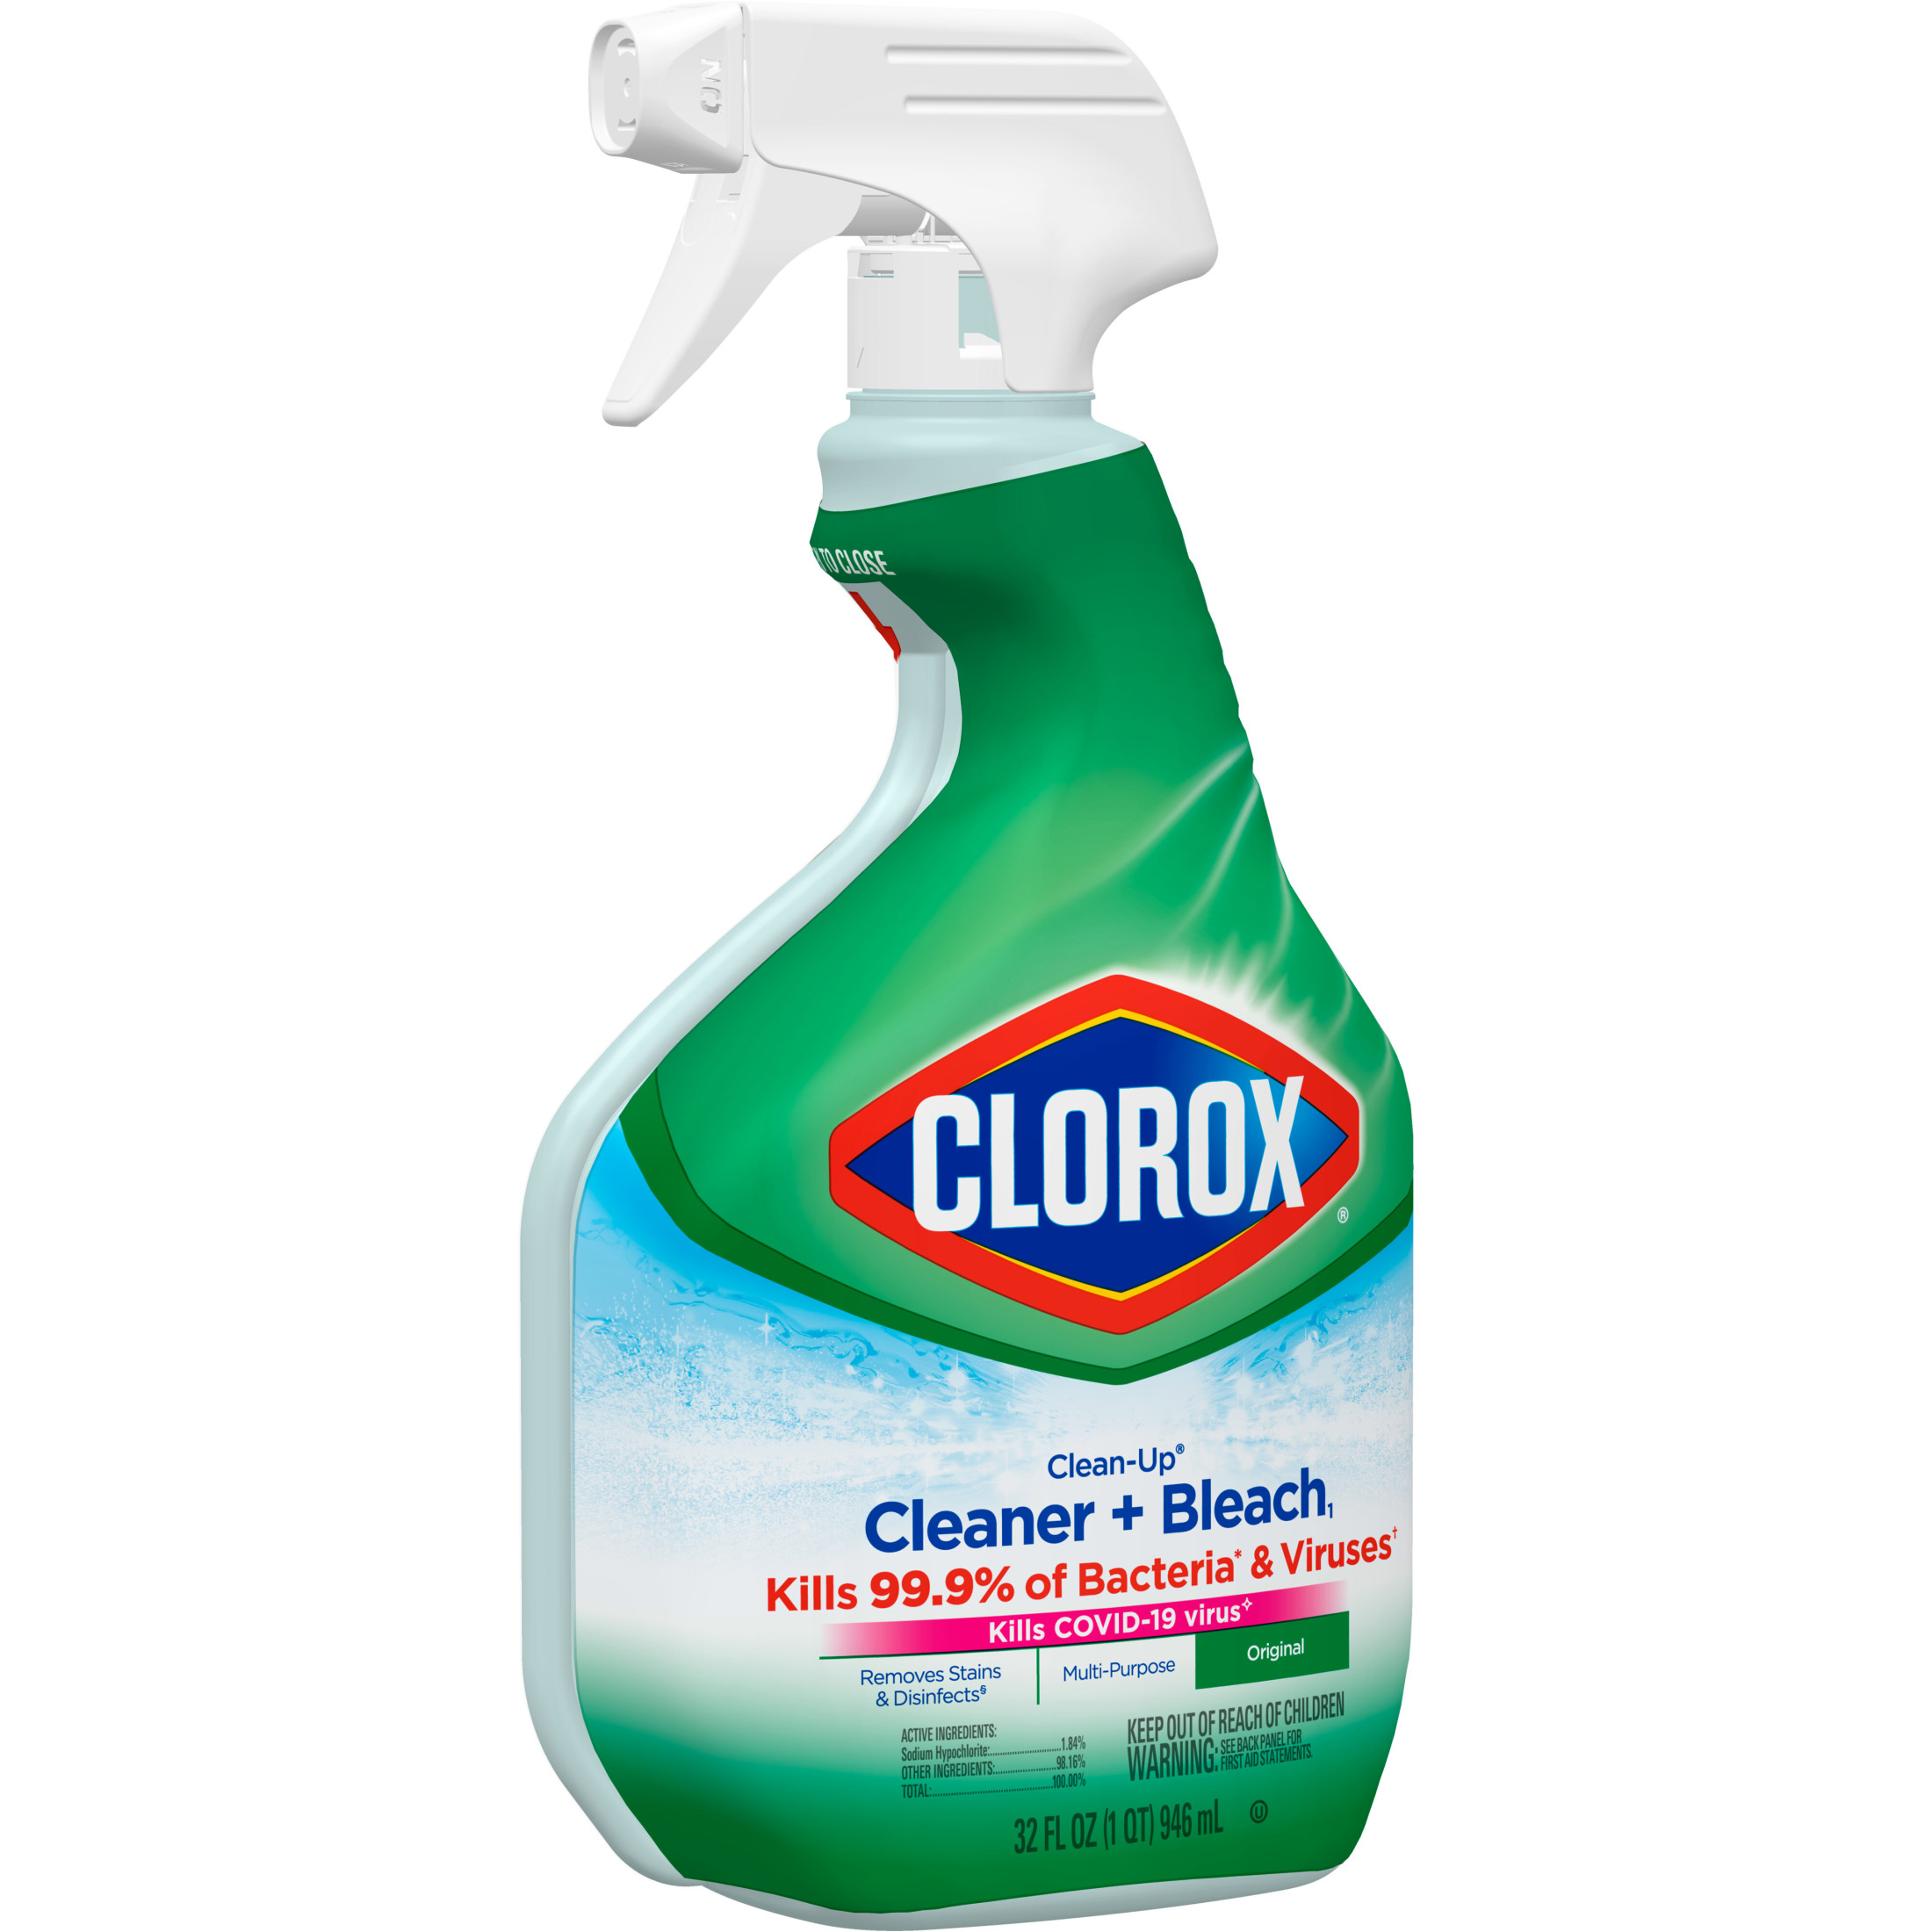 Clorox Clean-Up All Purpose Cleaner with Bleach, Spray Bottle, Original, 32 oz - image 2 of 13